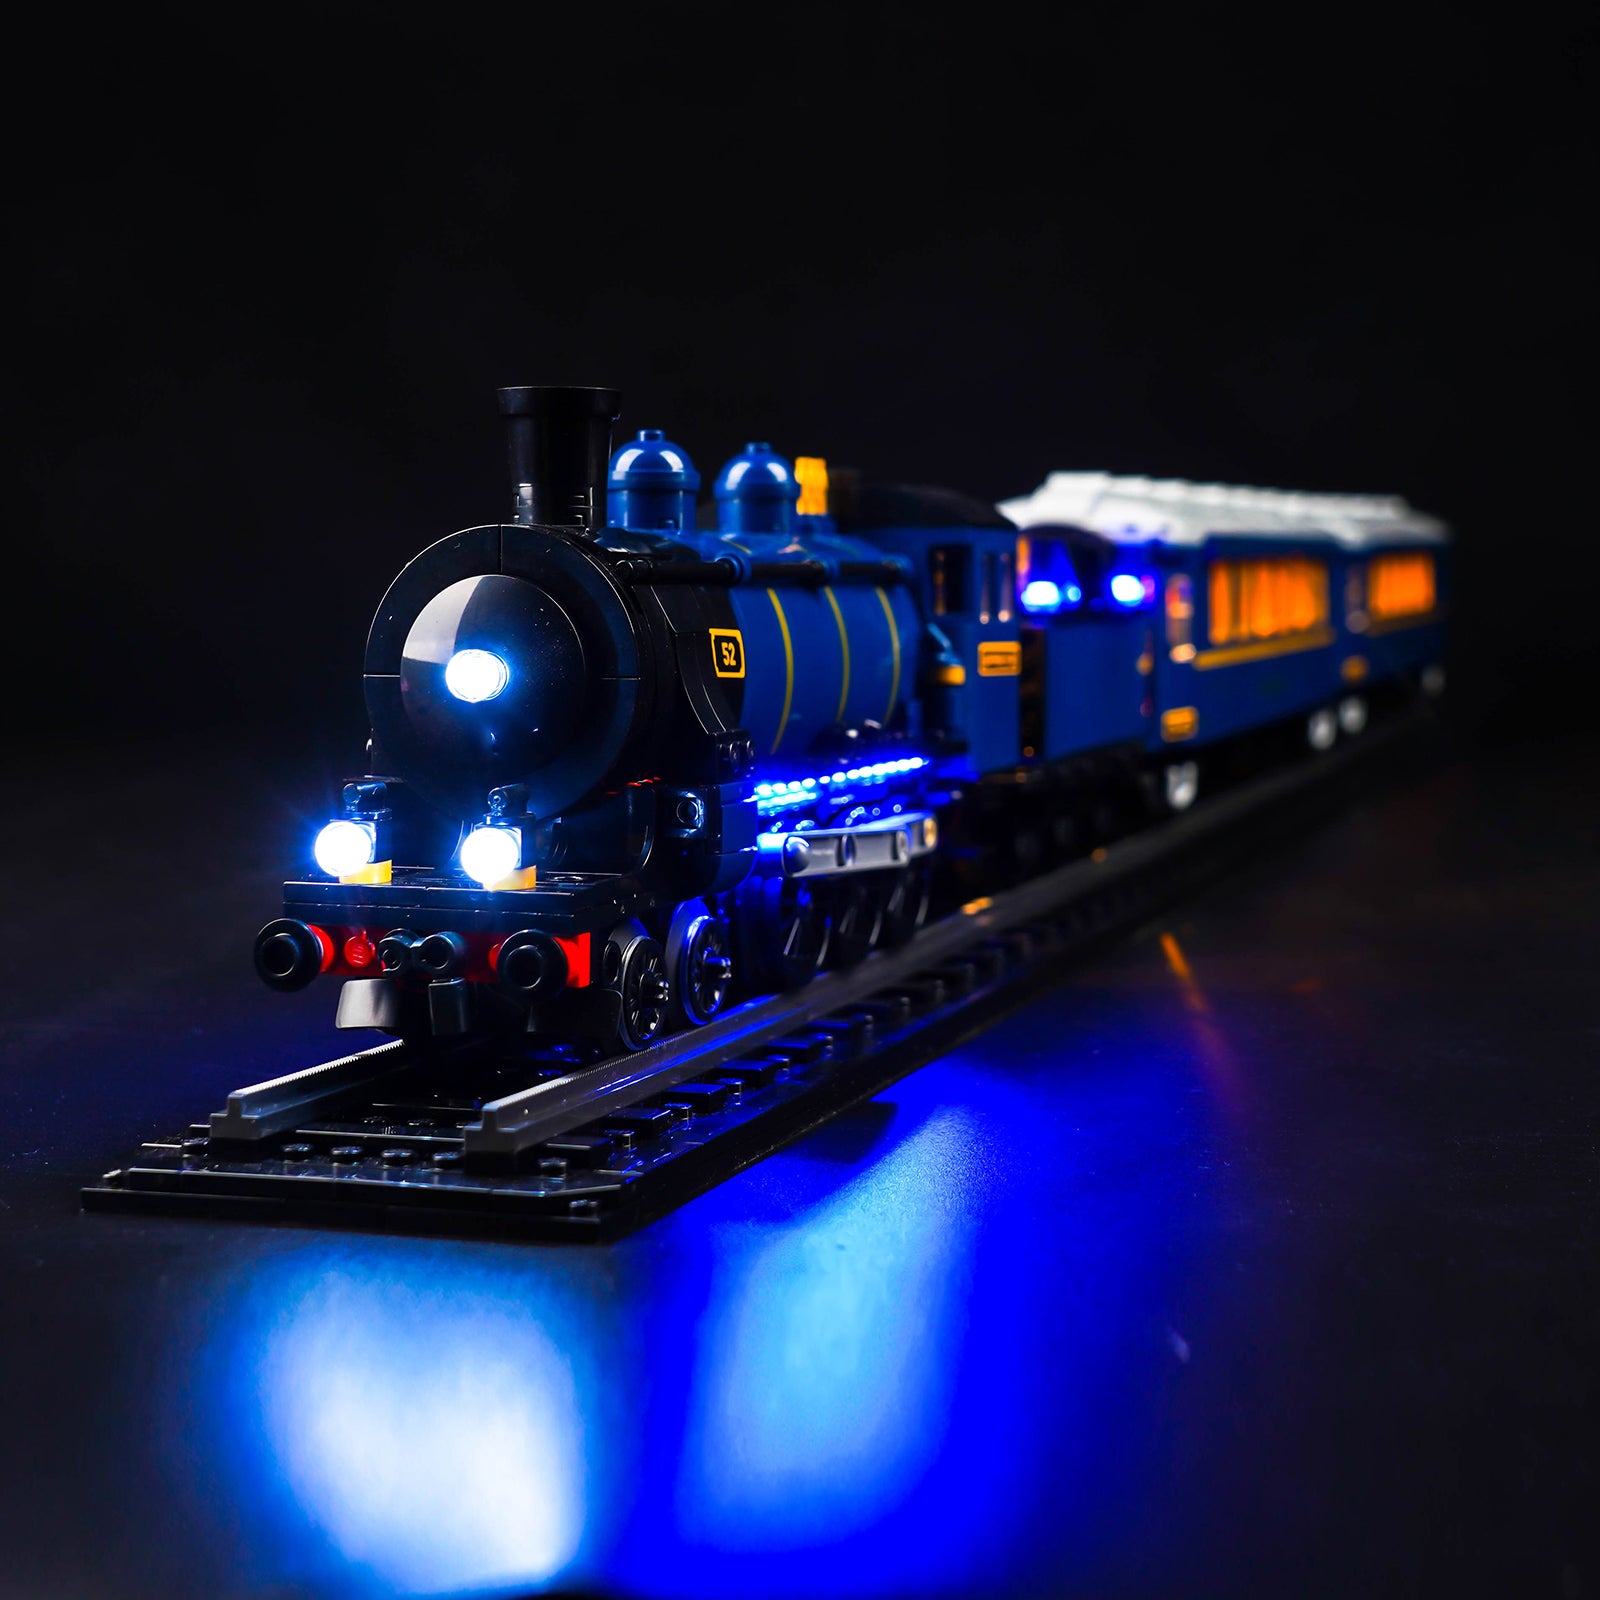 LED Light Kit for Lego 21344 The Orient Express Train, Classic Version Lighting, No Model Included